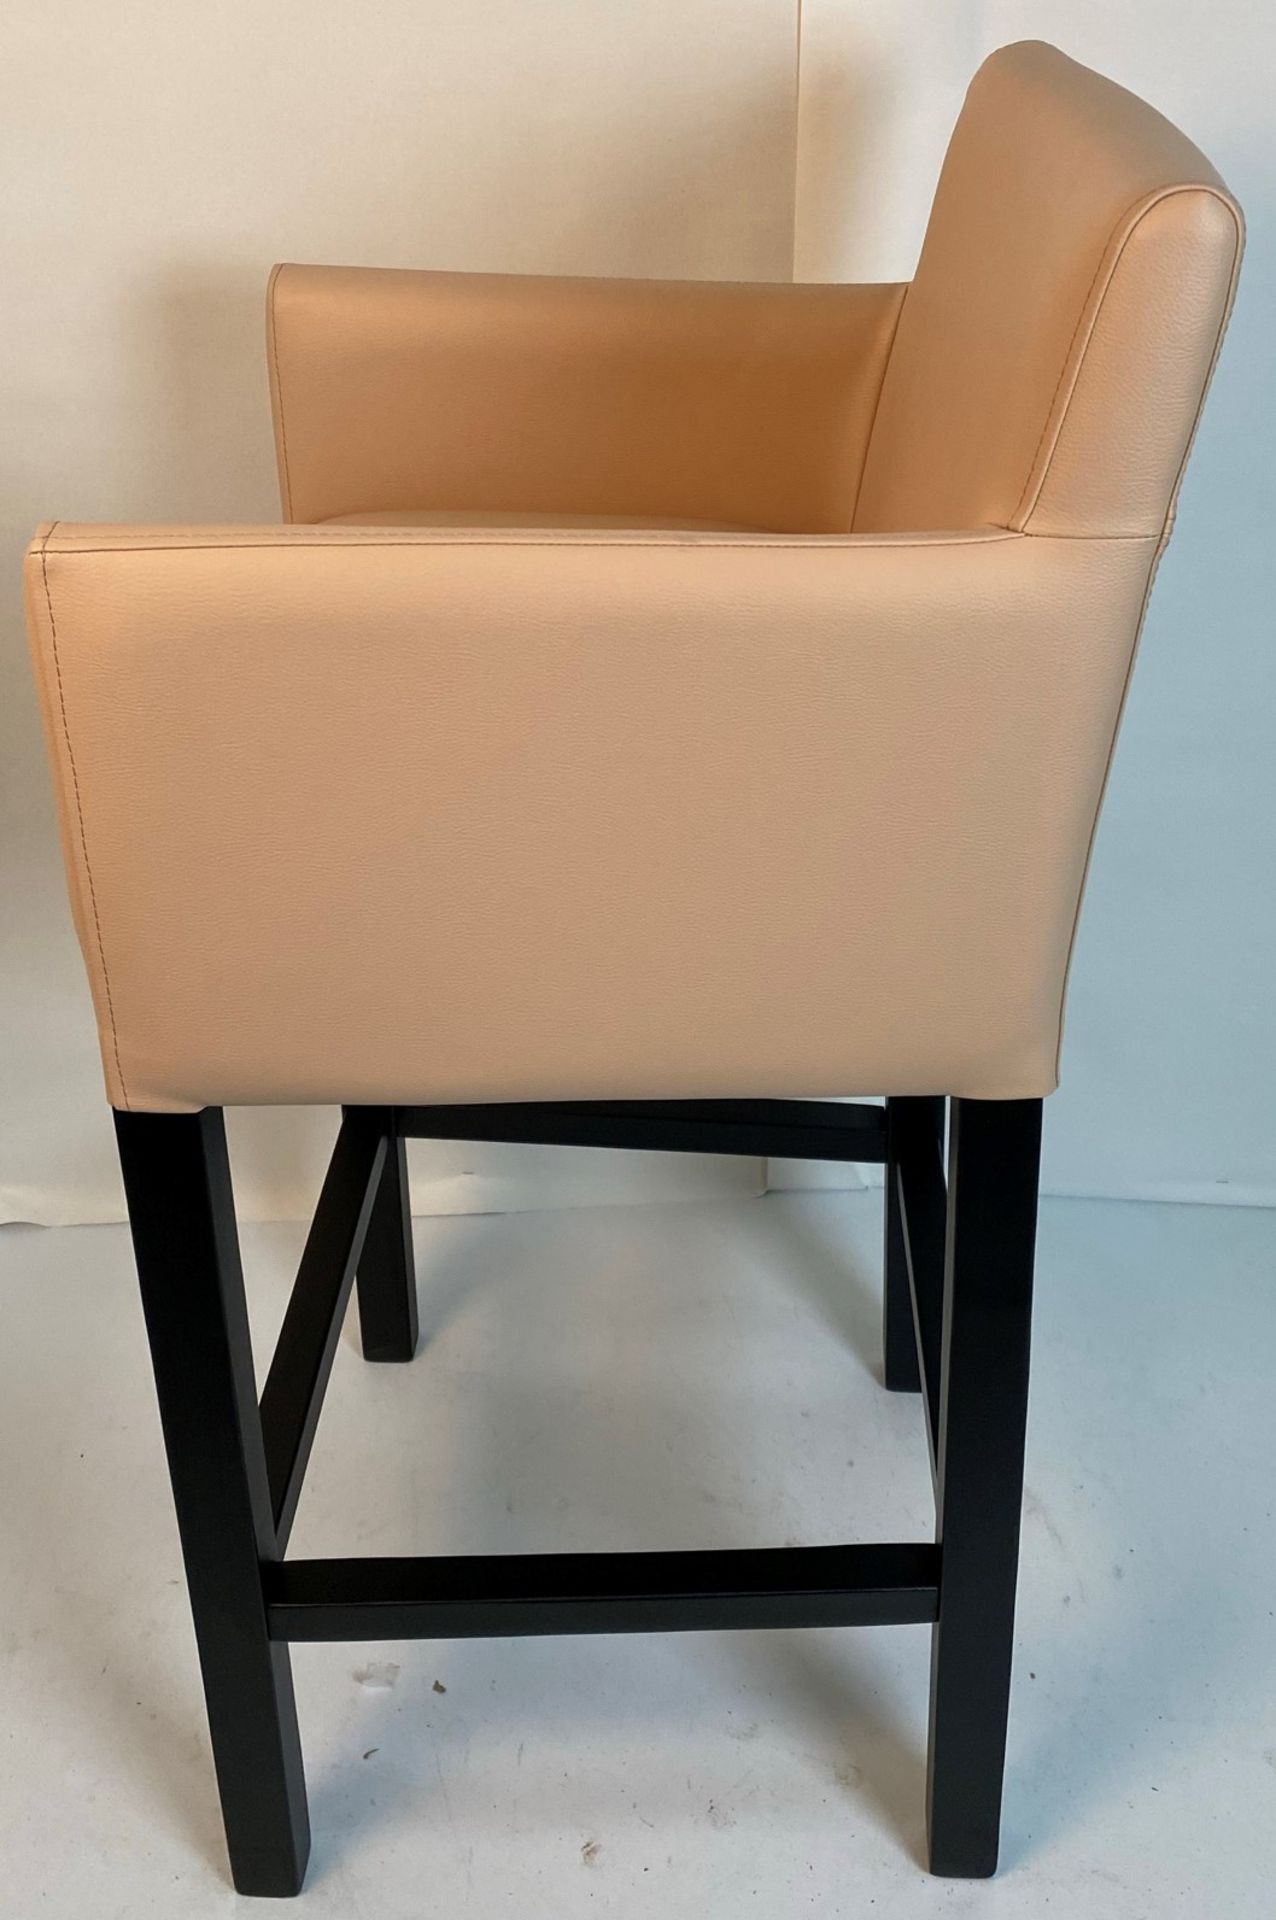 A Vista Vena BE-10 Cappuchino high stool with black wood frame - Image 4 of 8